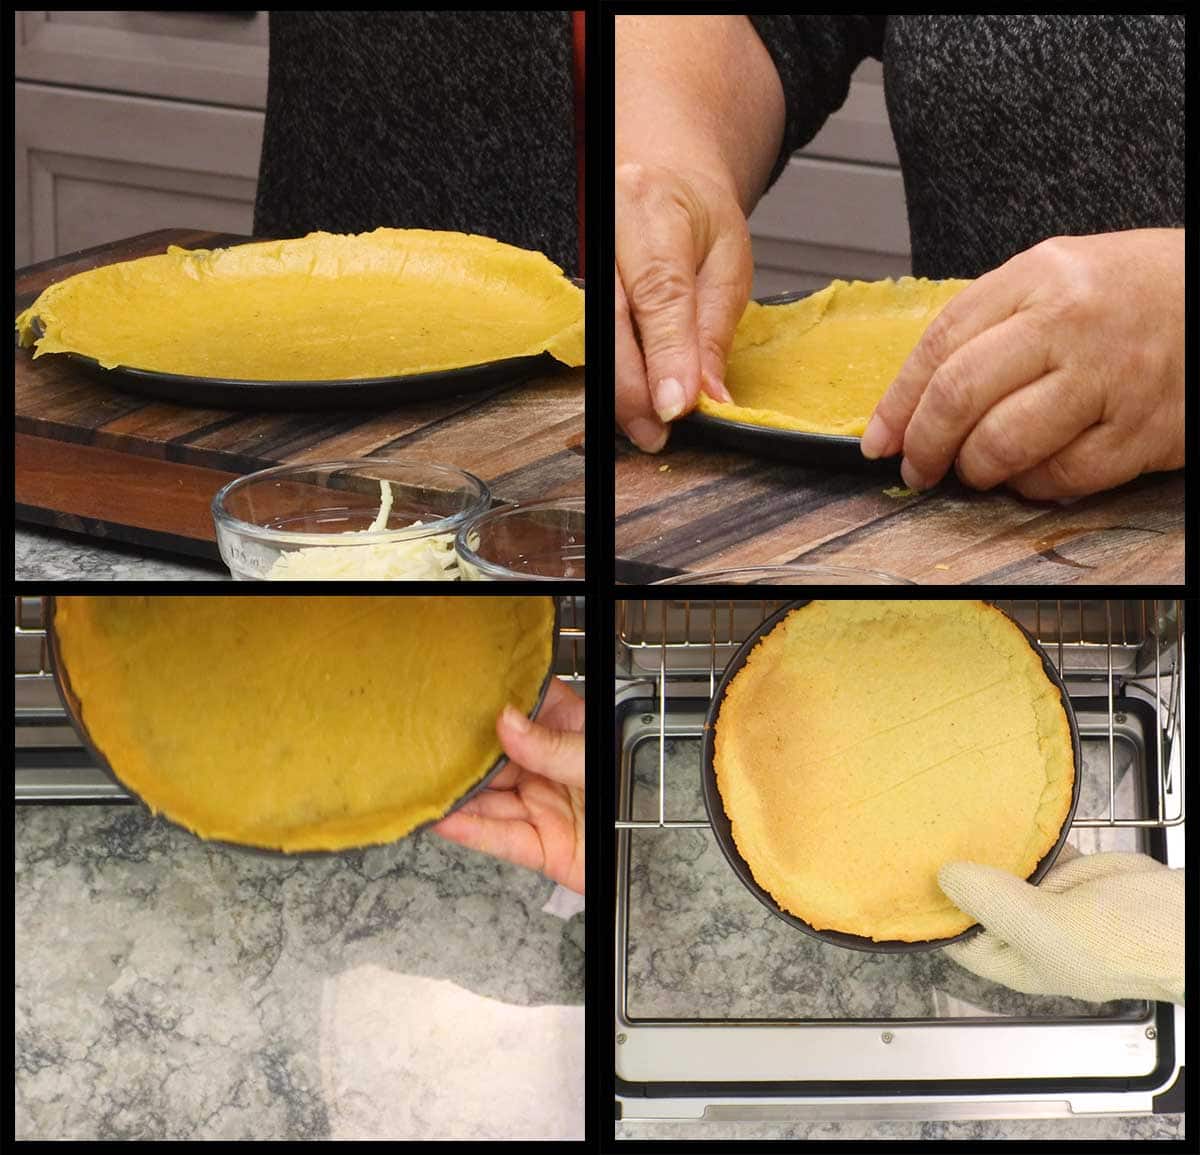 forming and baking pizza crust.